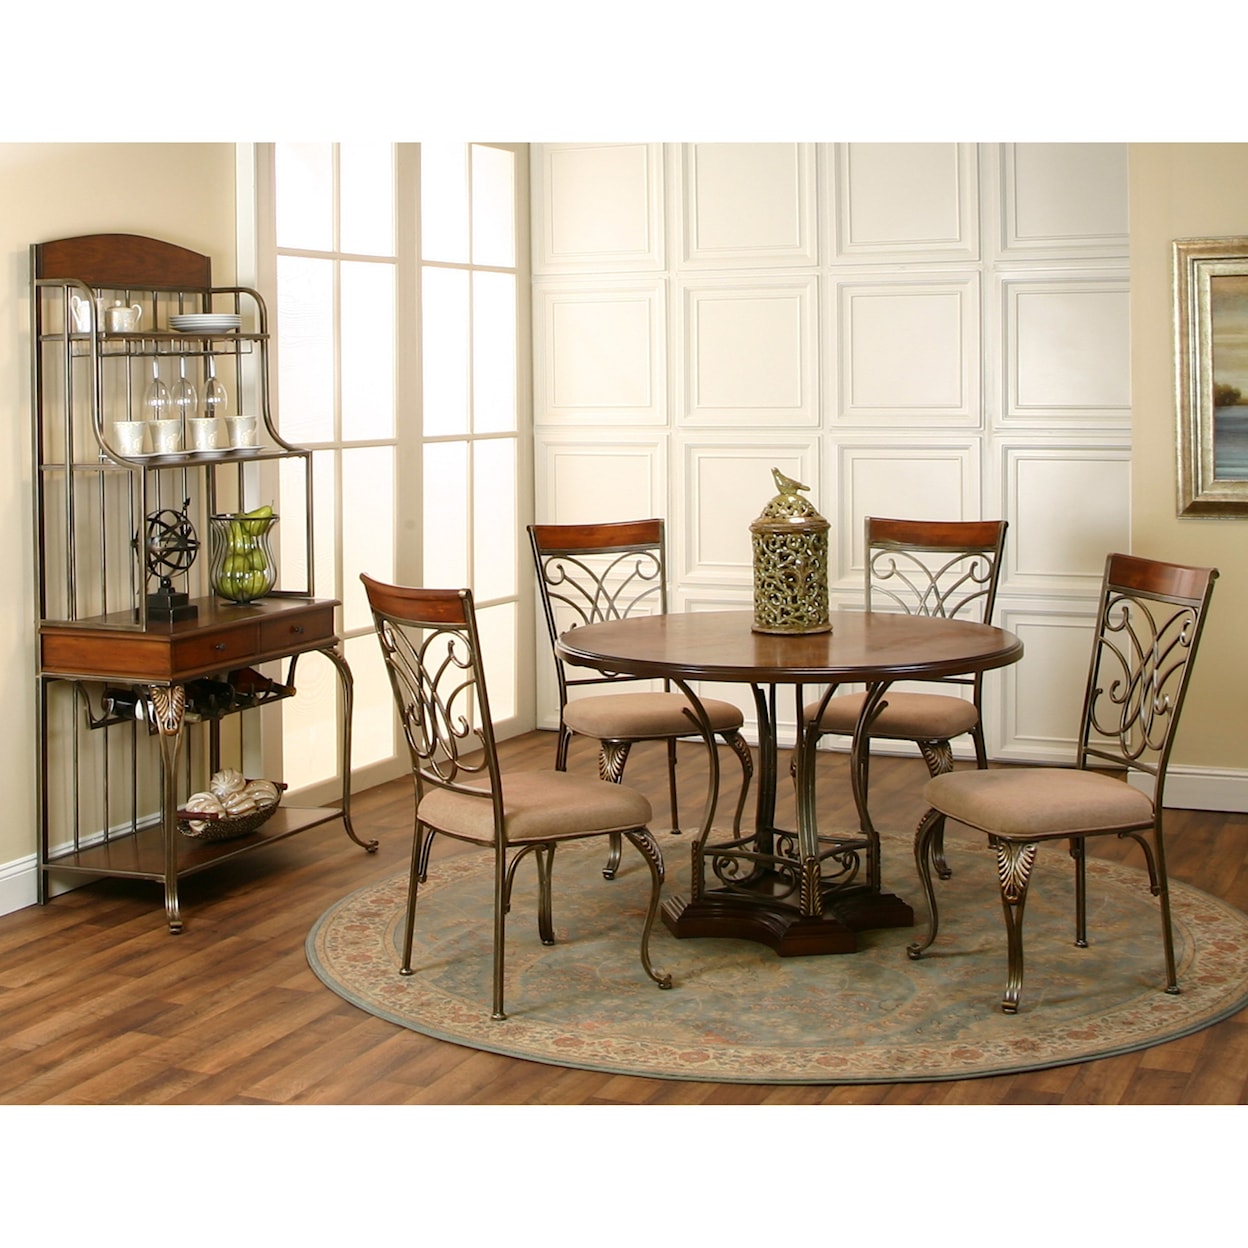 Cramco, Inc Harlow Casual Dining Room Group